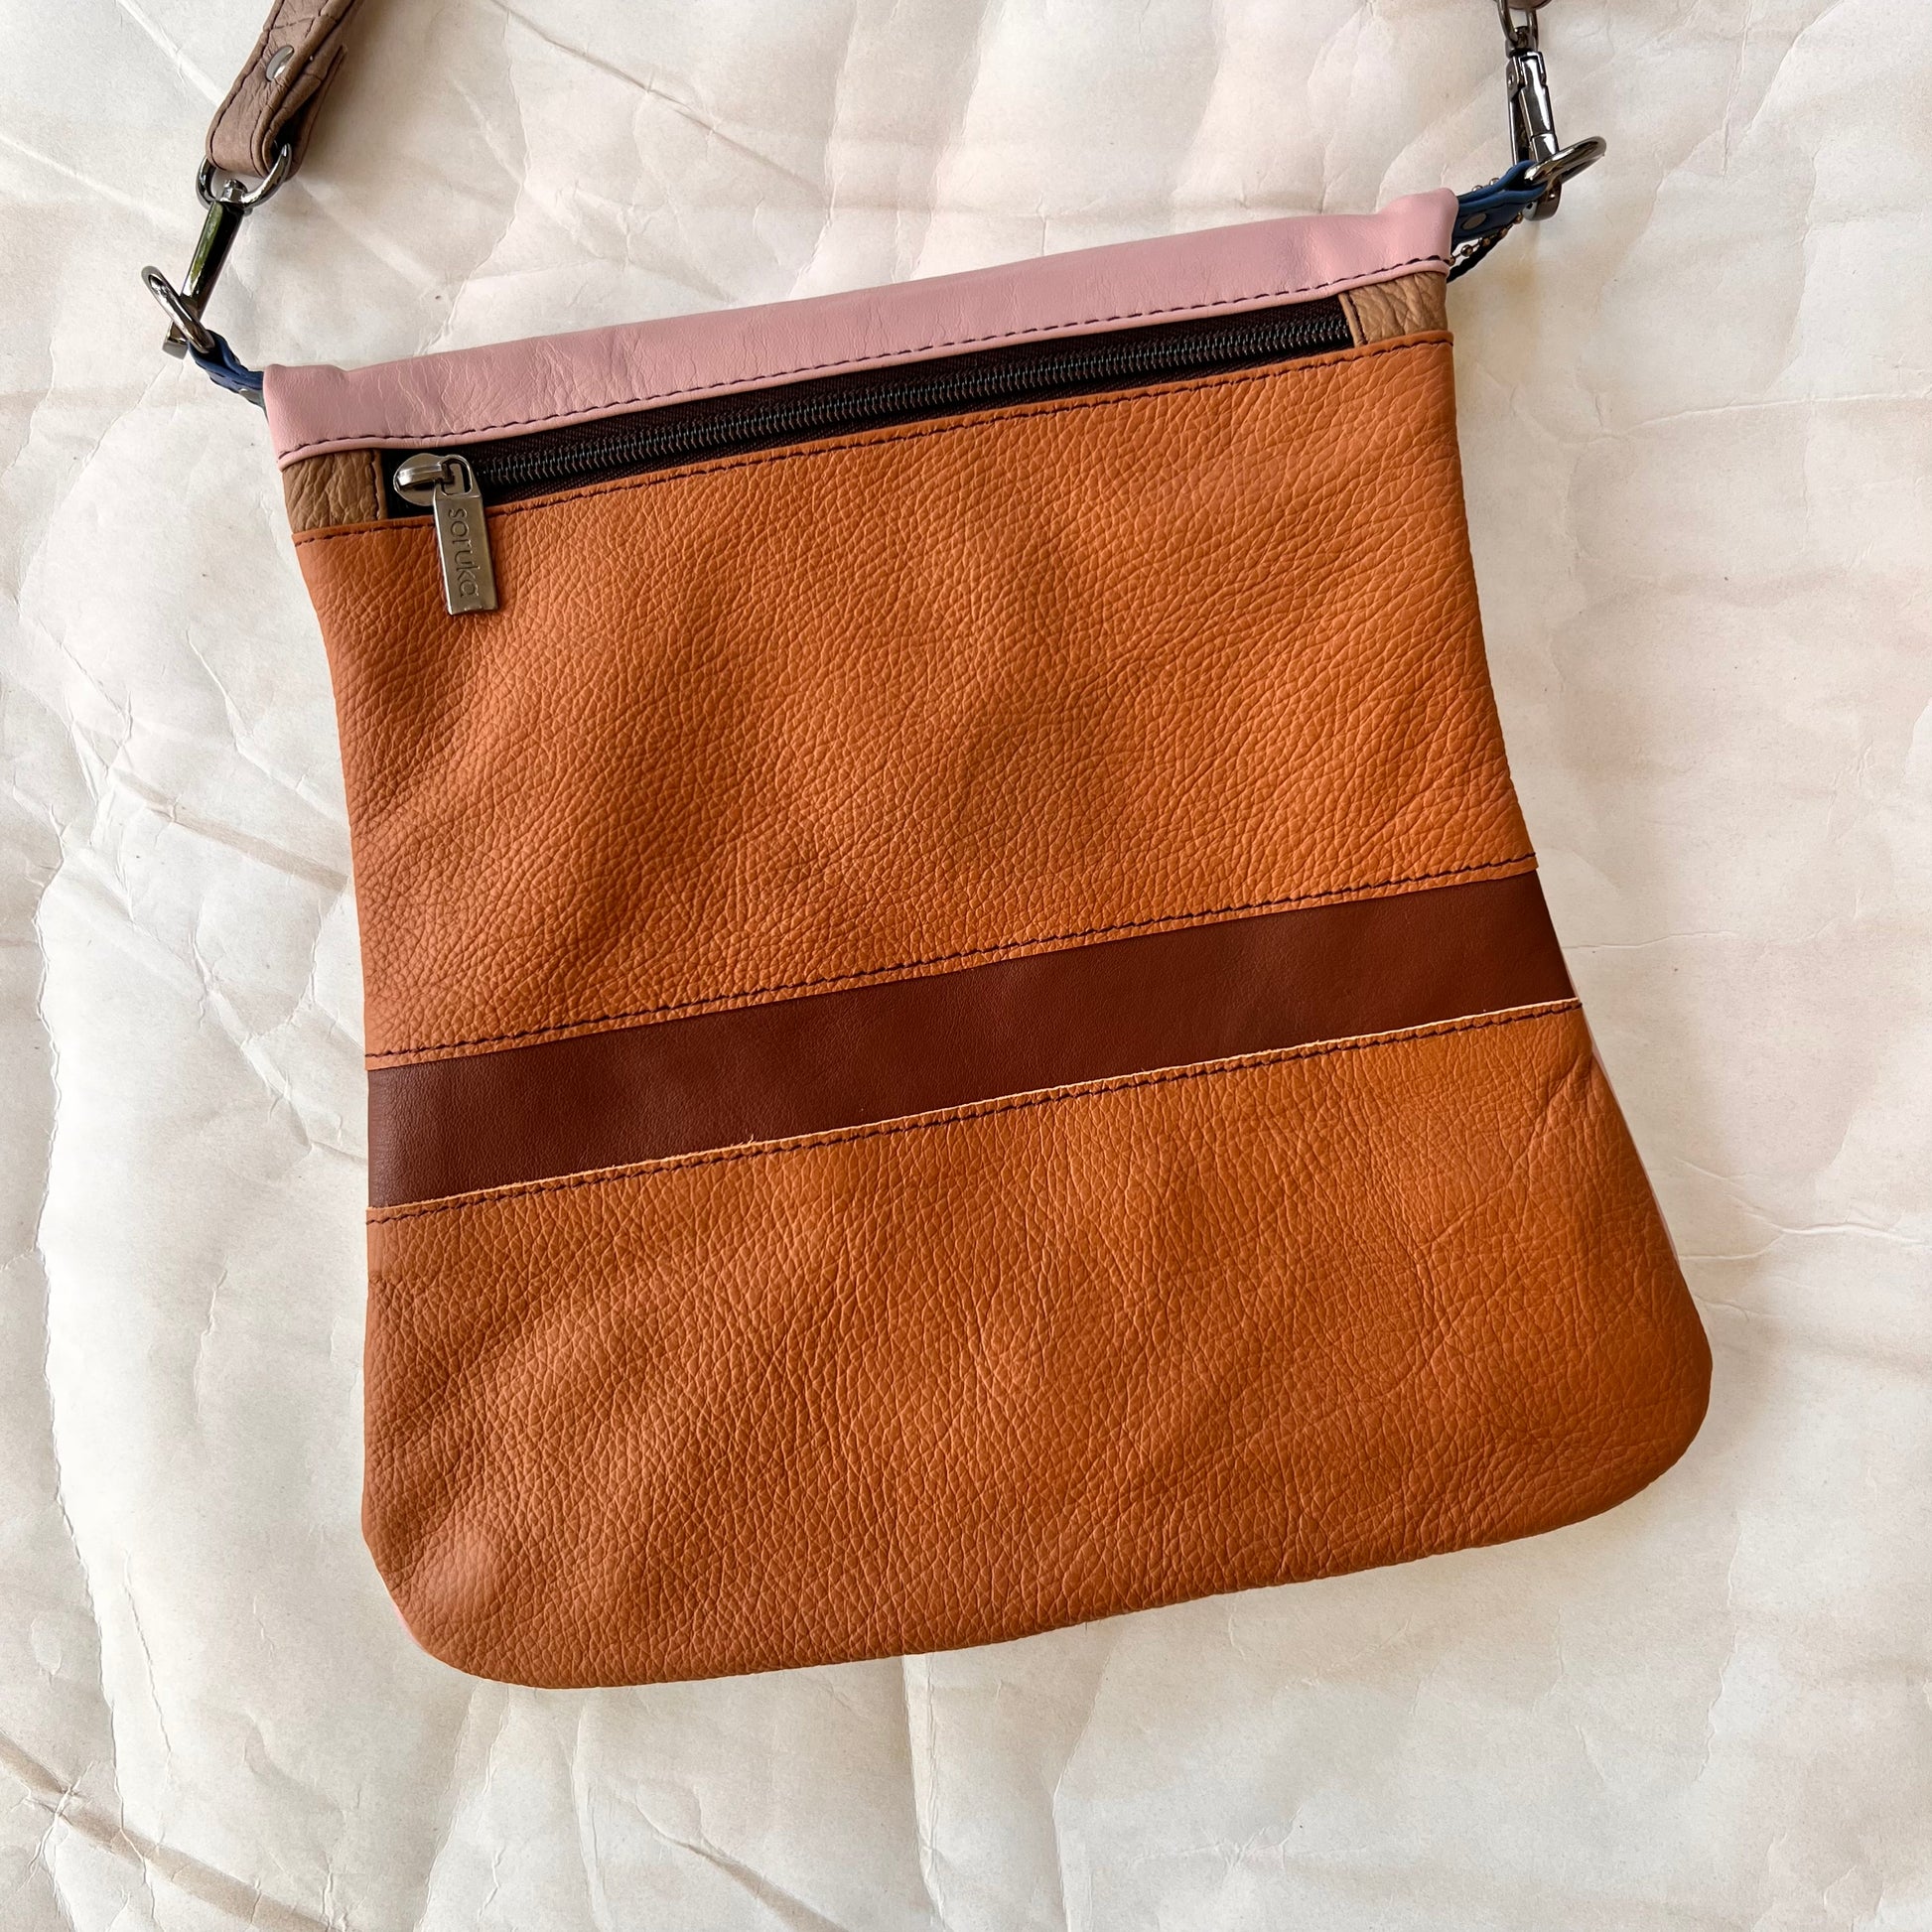 shades of brown striped greta bag with zipper across the top.